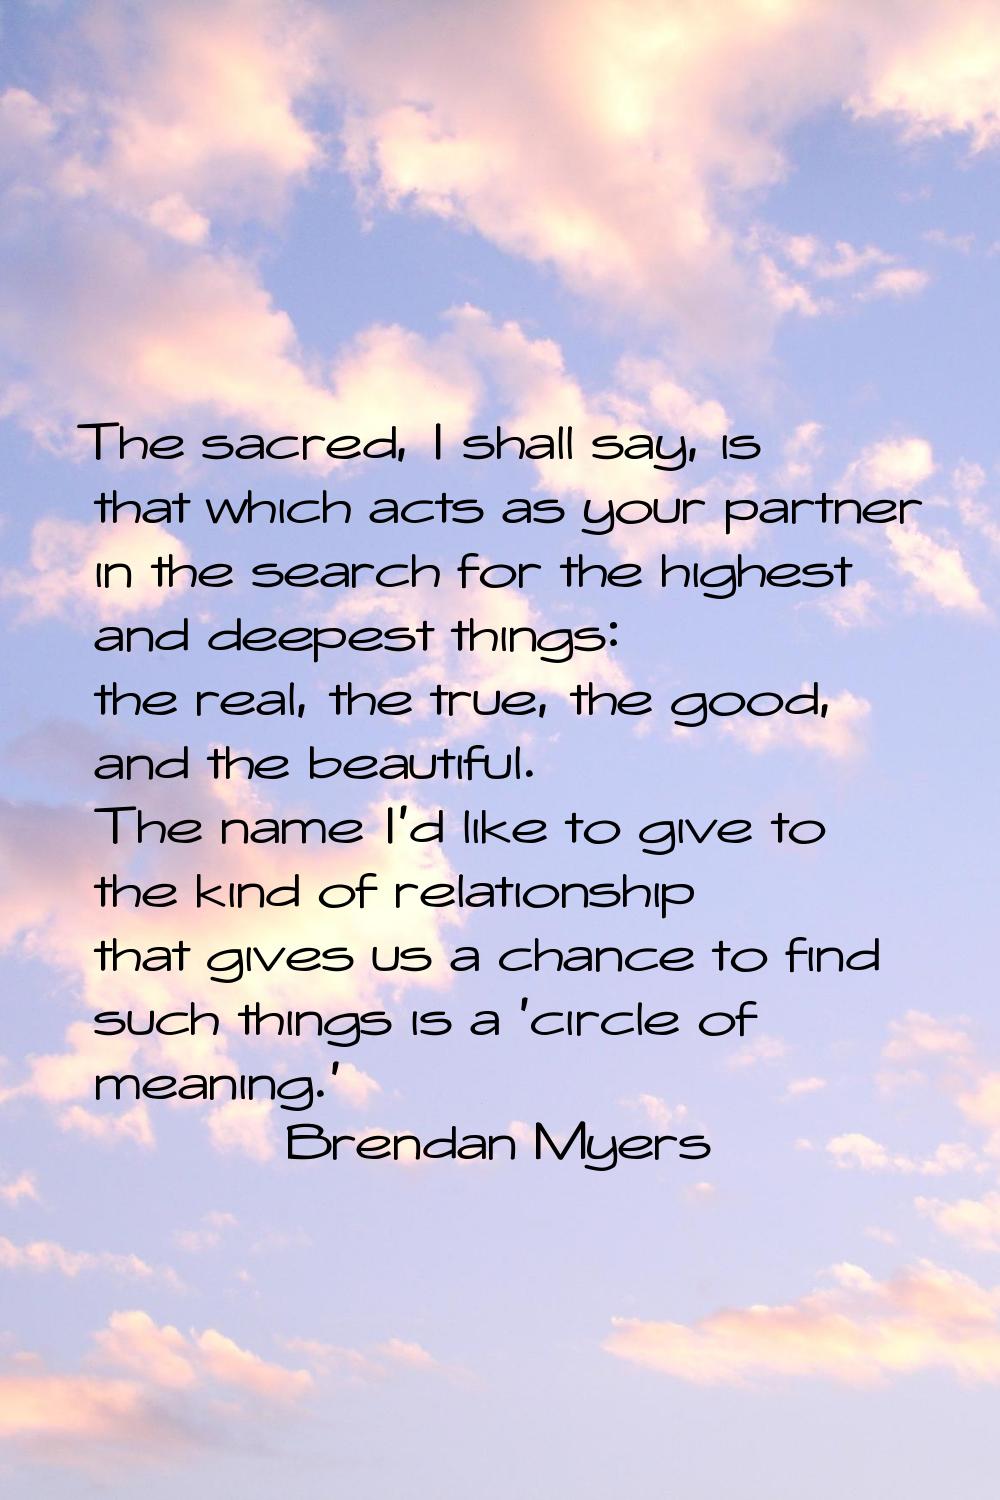 The sacred, I shall say, is that which acts as your partner in the search for the highest and deepe